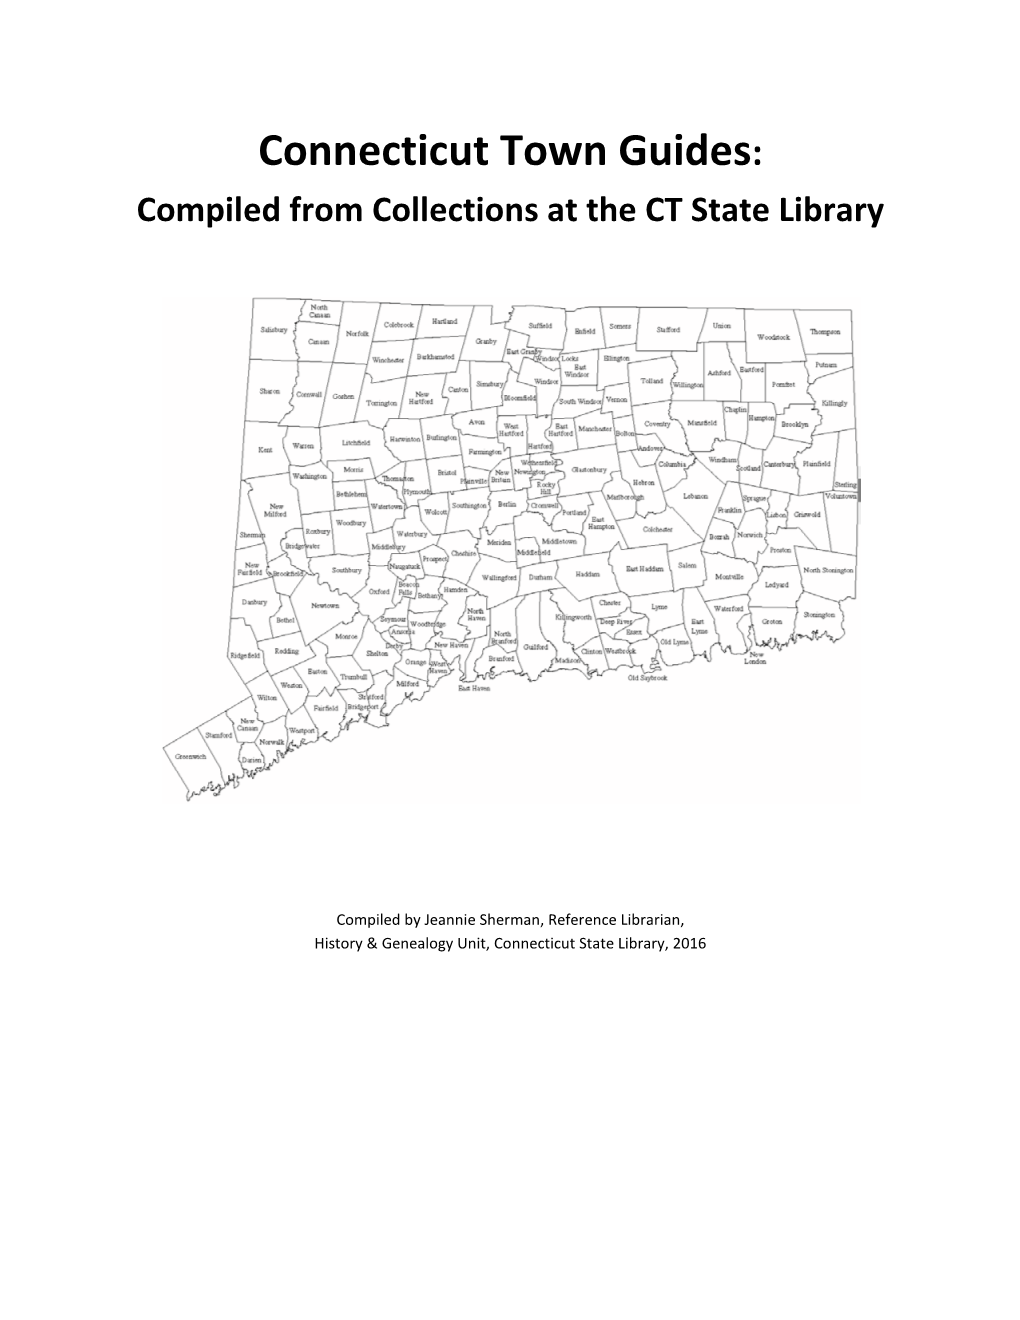 Connecticut Town Guides: Compiled from Collections at the CT State Library